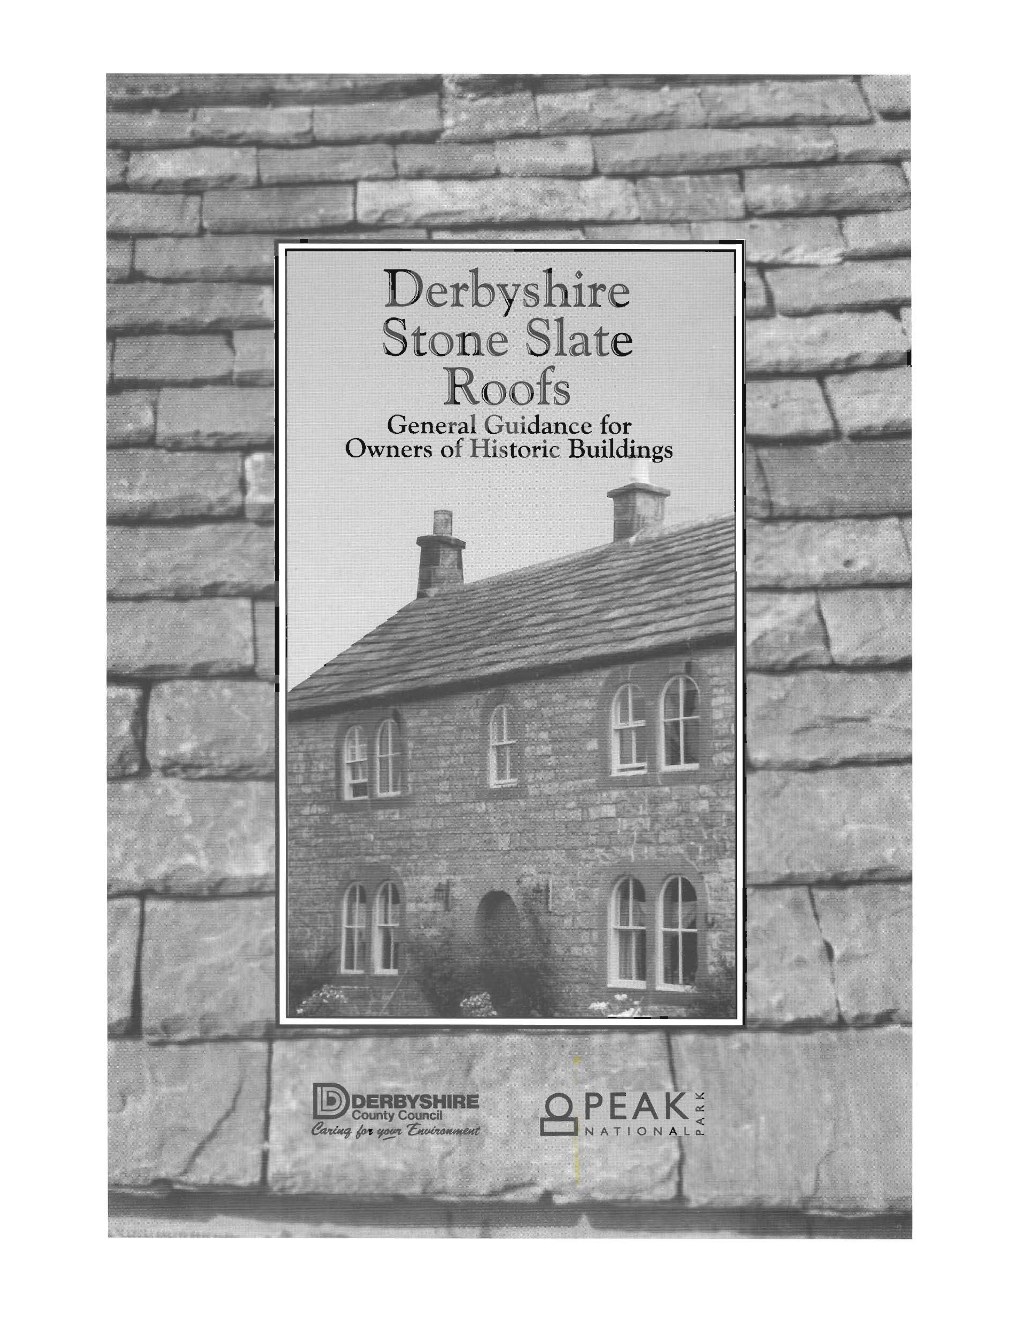 Stone Slate Roof Guide for Building Owners